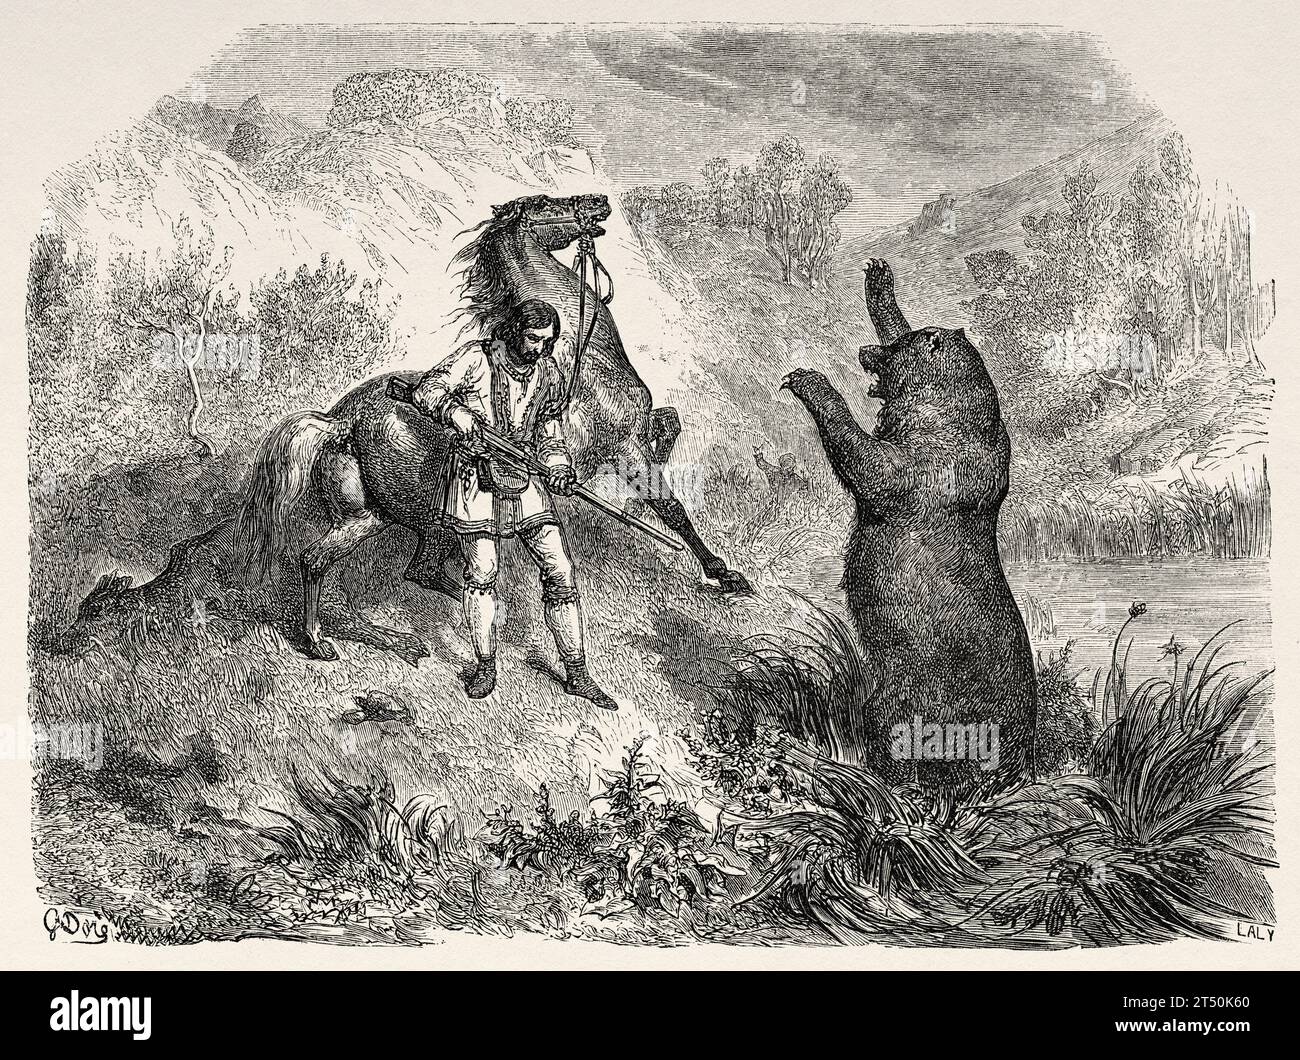 Bear hunting scene, USA. Exploration of the Rocky Mountains in 1857-1859 by Captain John Palliser. Old 19th century engraving from Le Tour du Monde 1860 Stock Photo